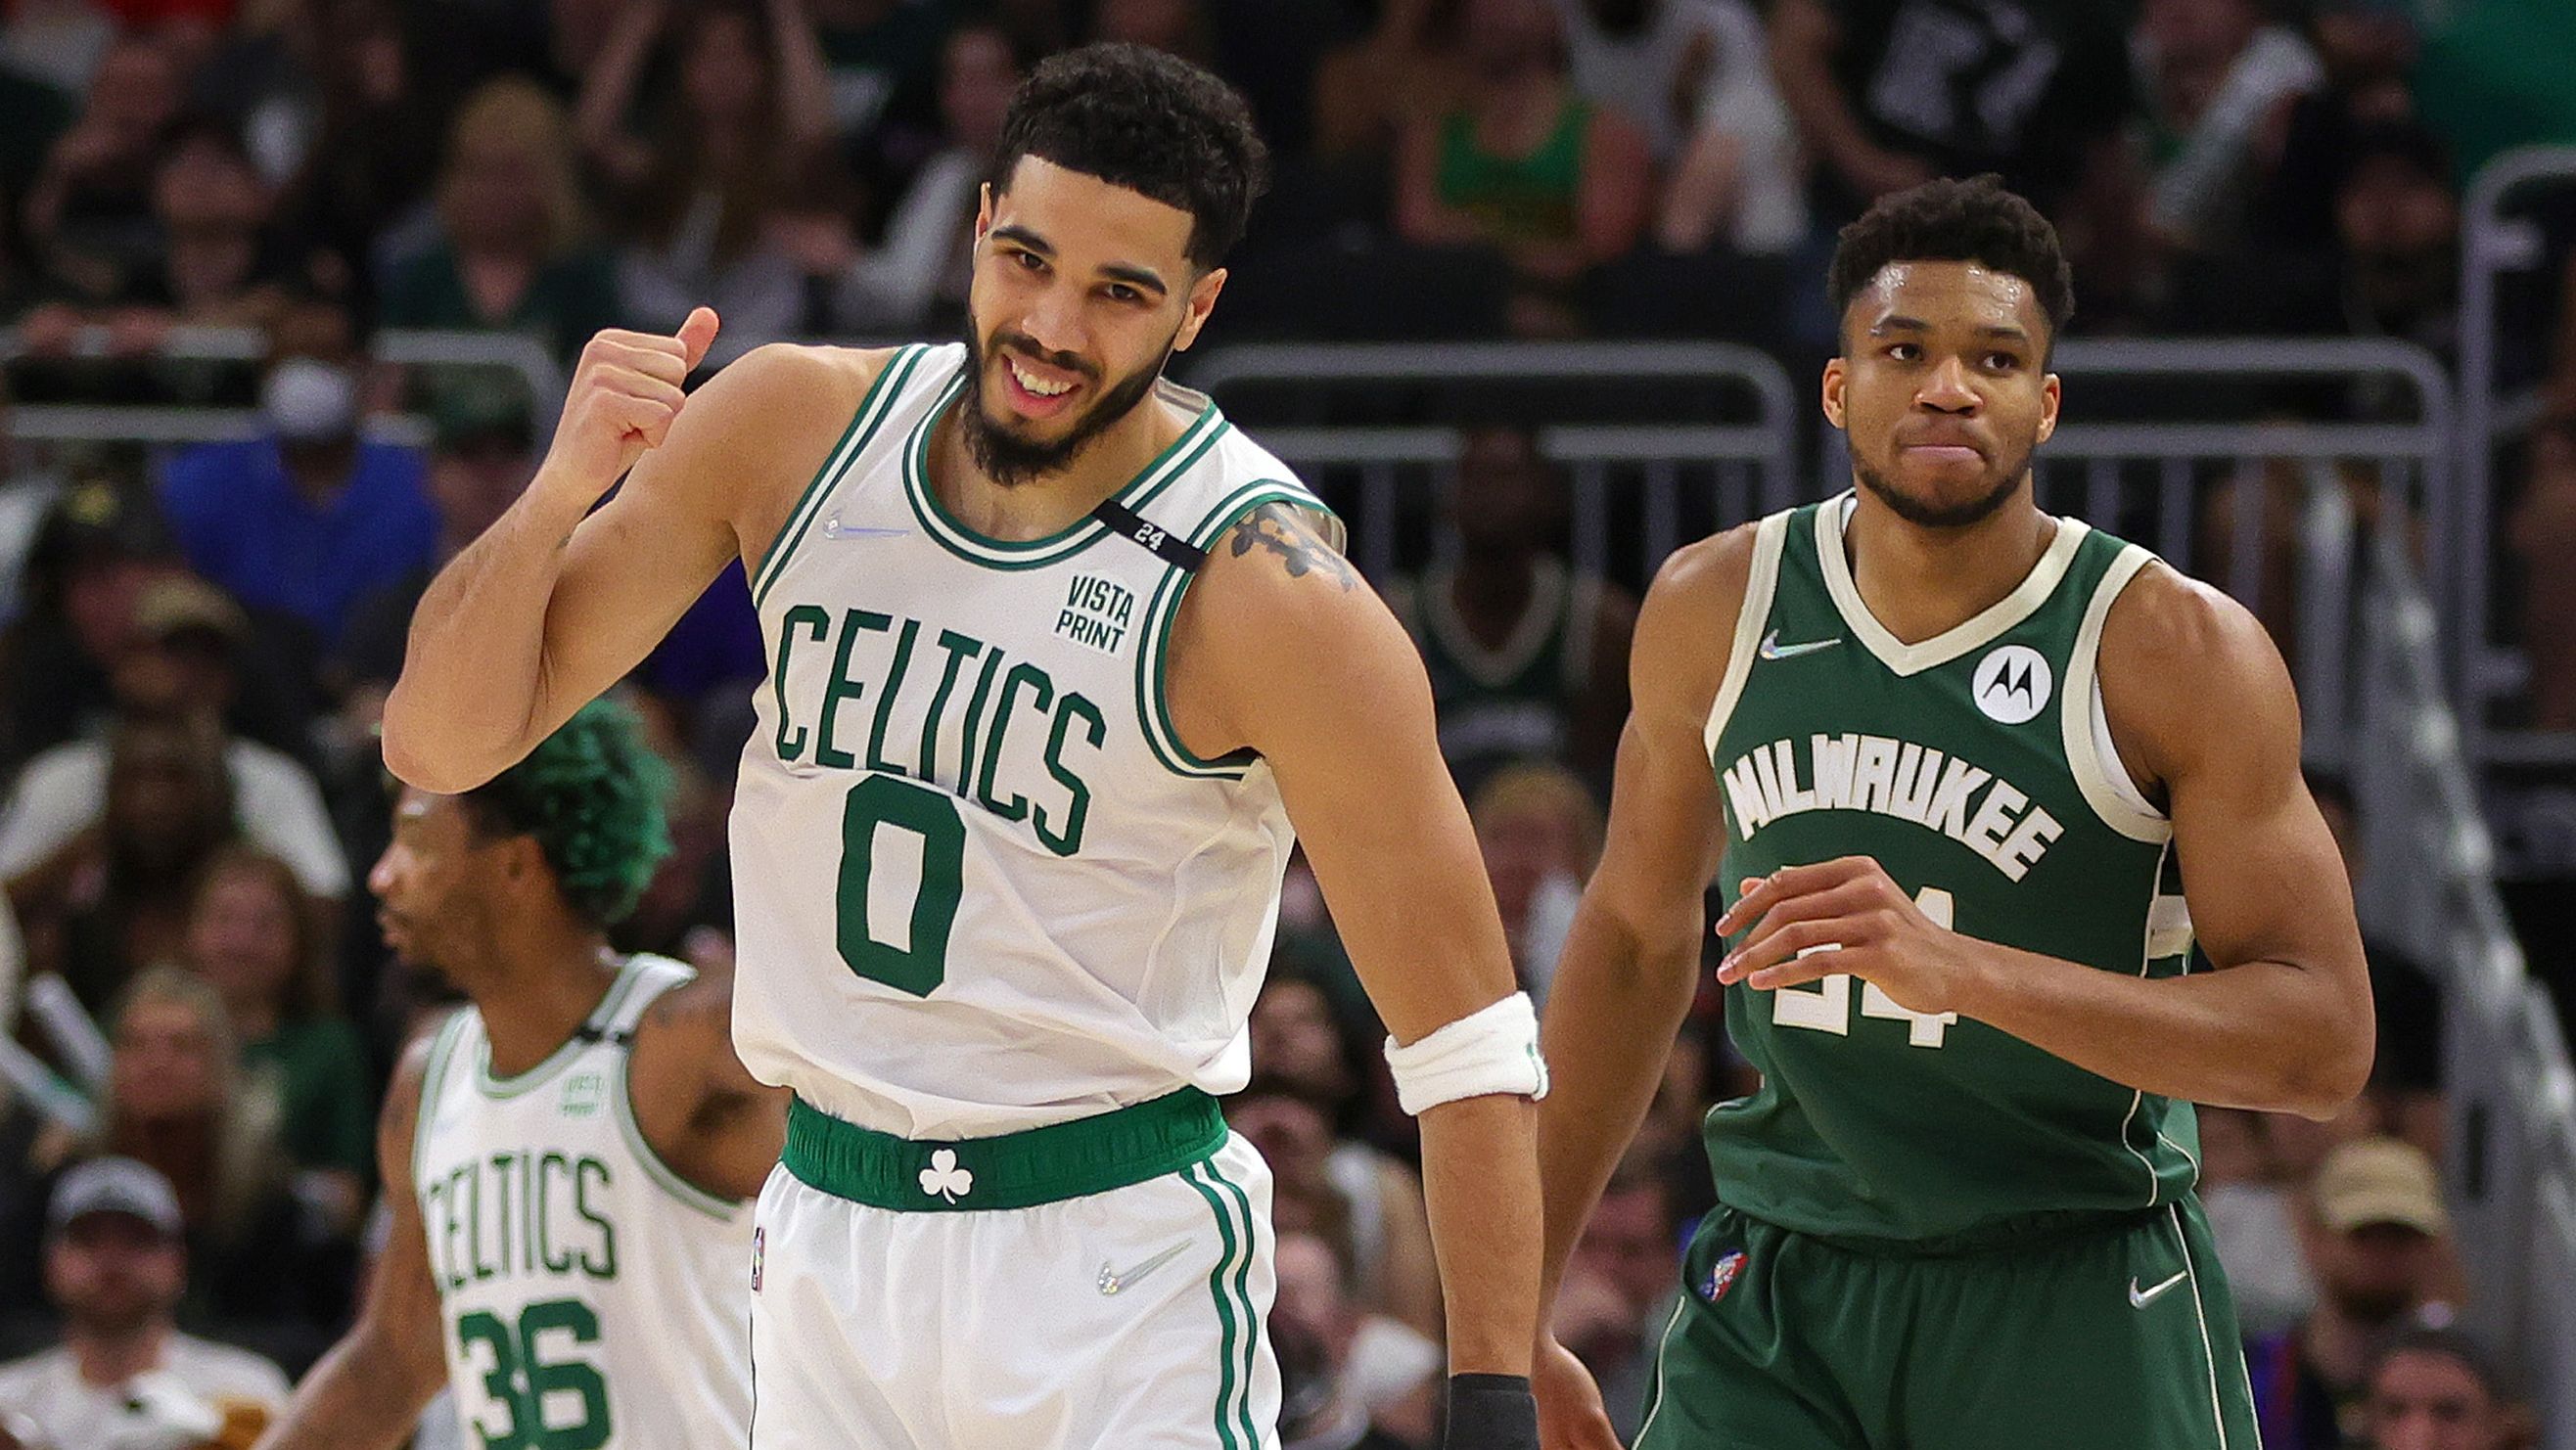 Jayson Tatum celebrates a basket against Giannis Antetokounmpo during game six of the 2022 NBA playoffs Eastern Conference semifinals.